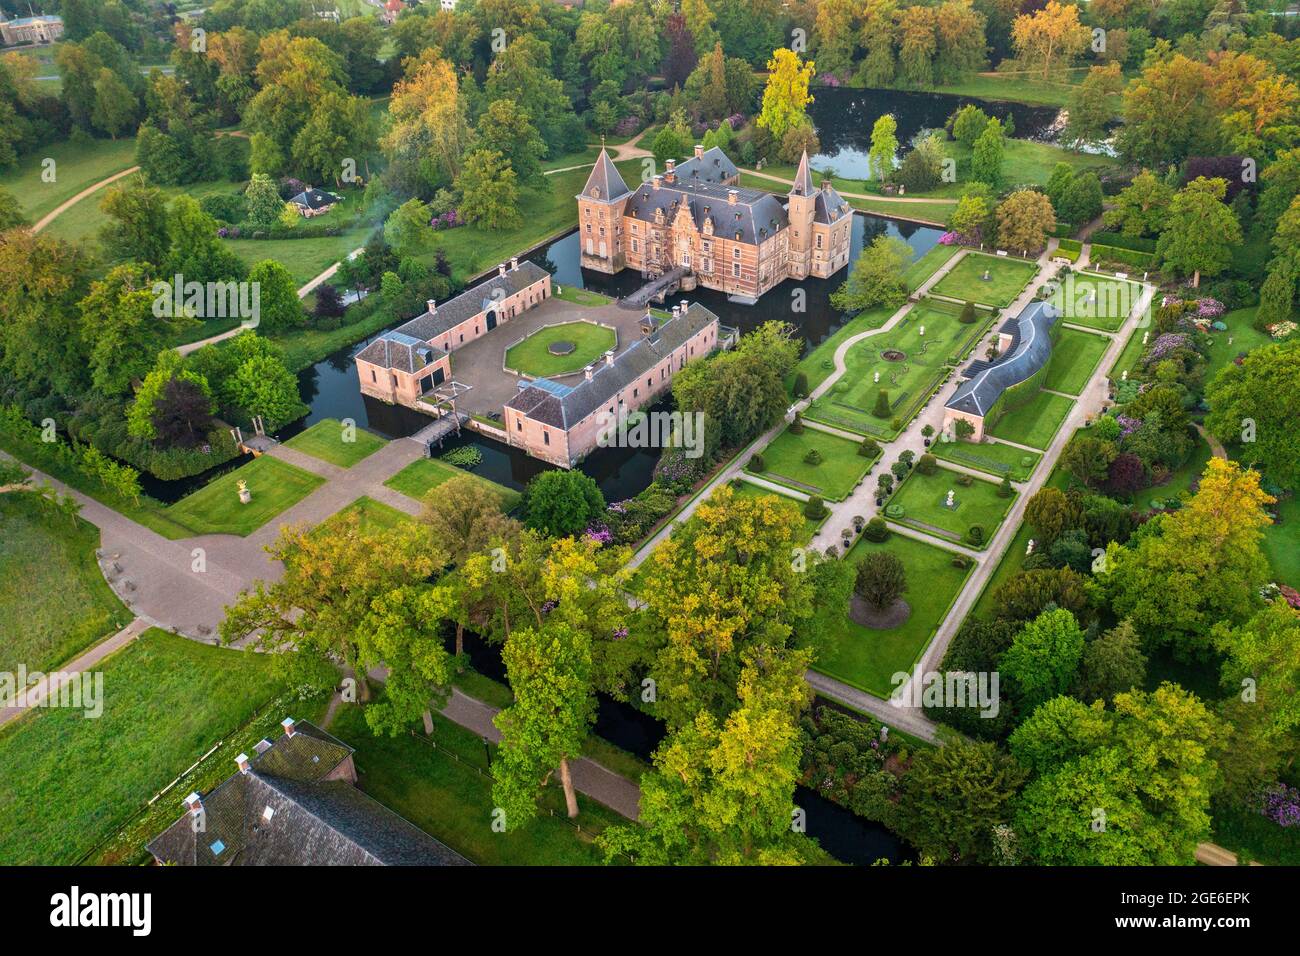 The Netherlands, Delden. Twickel estate and castle. Aerial. Stock Photo